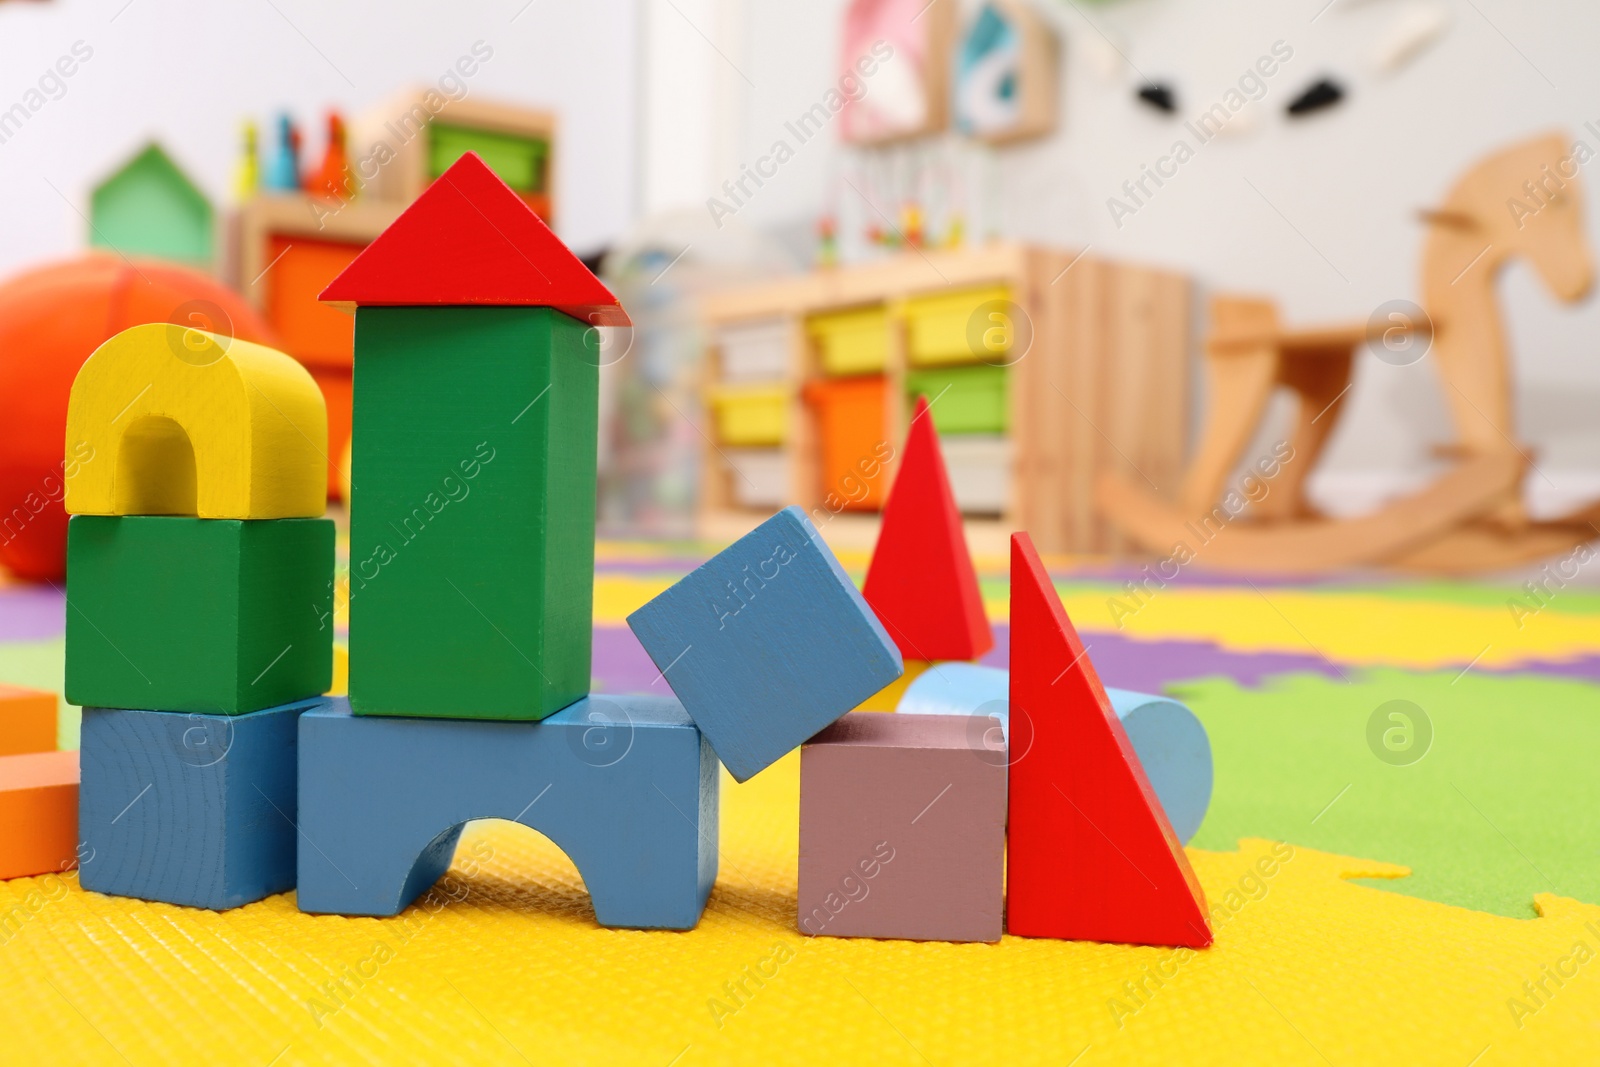 Photo of Wooden castle made of colorful blocks on carpet in playroom. Interior design